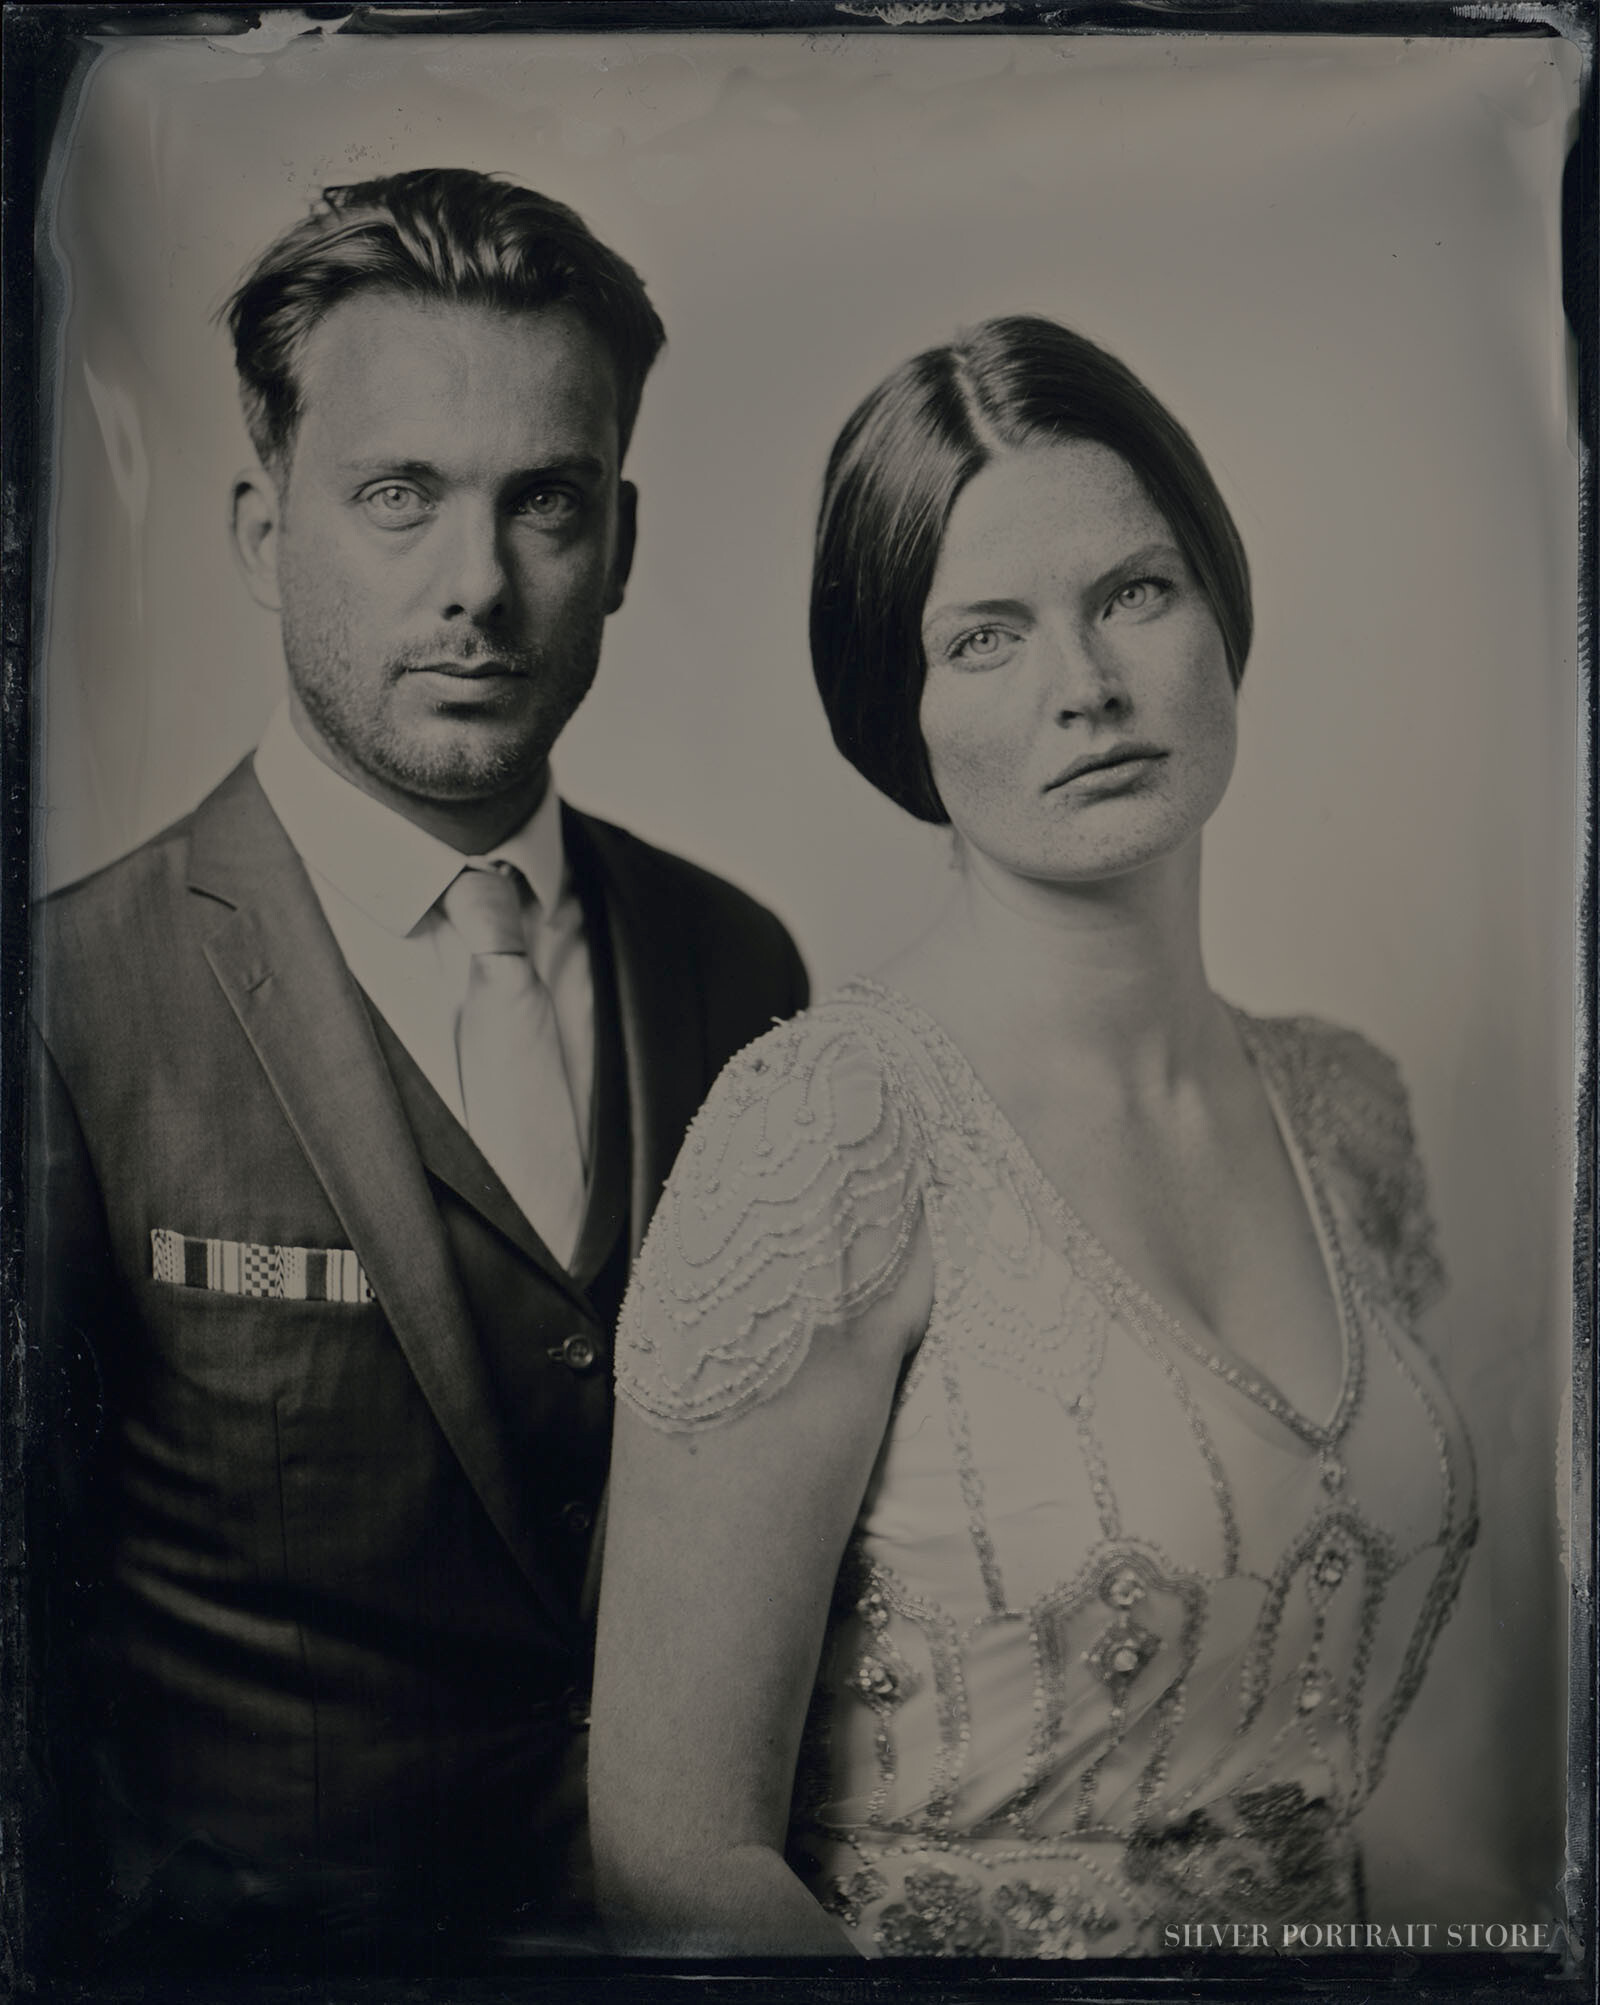 Marte & Dirk-Silver Portrait Store-Scan from Wet plate collodion-Tintype 10 x 12 cm.